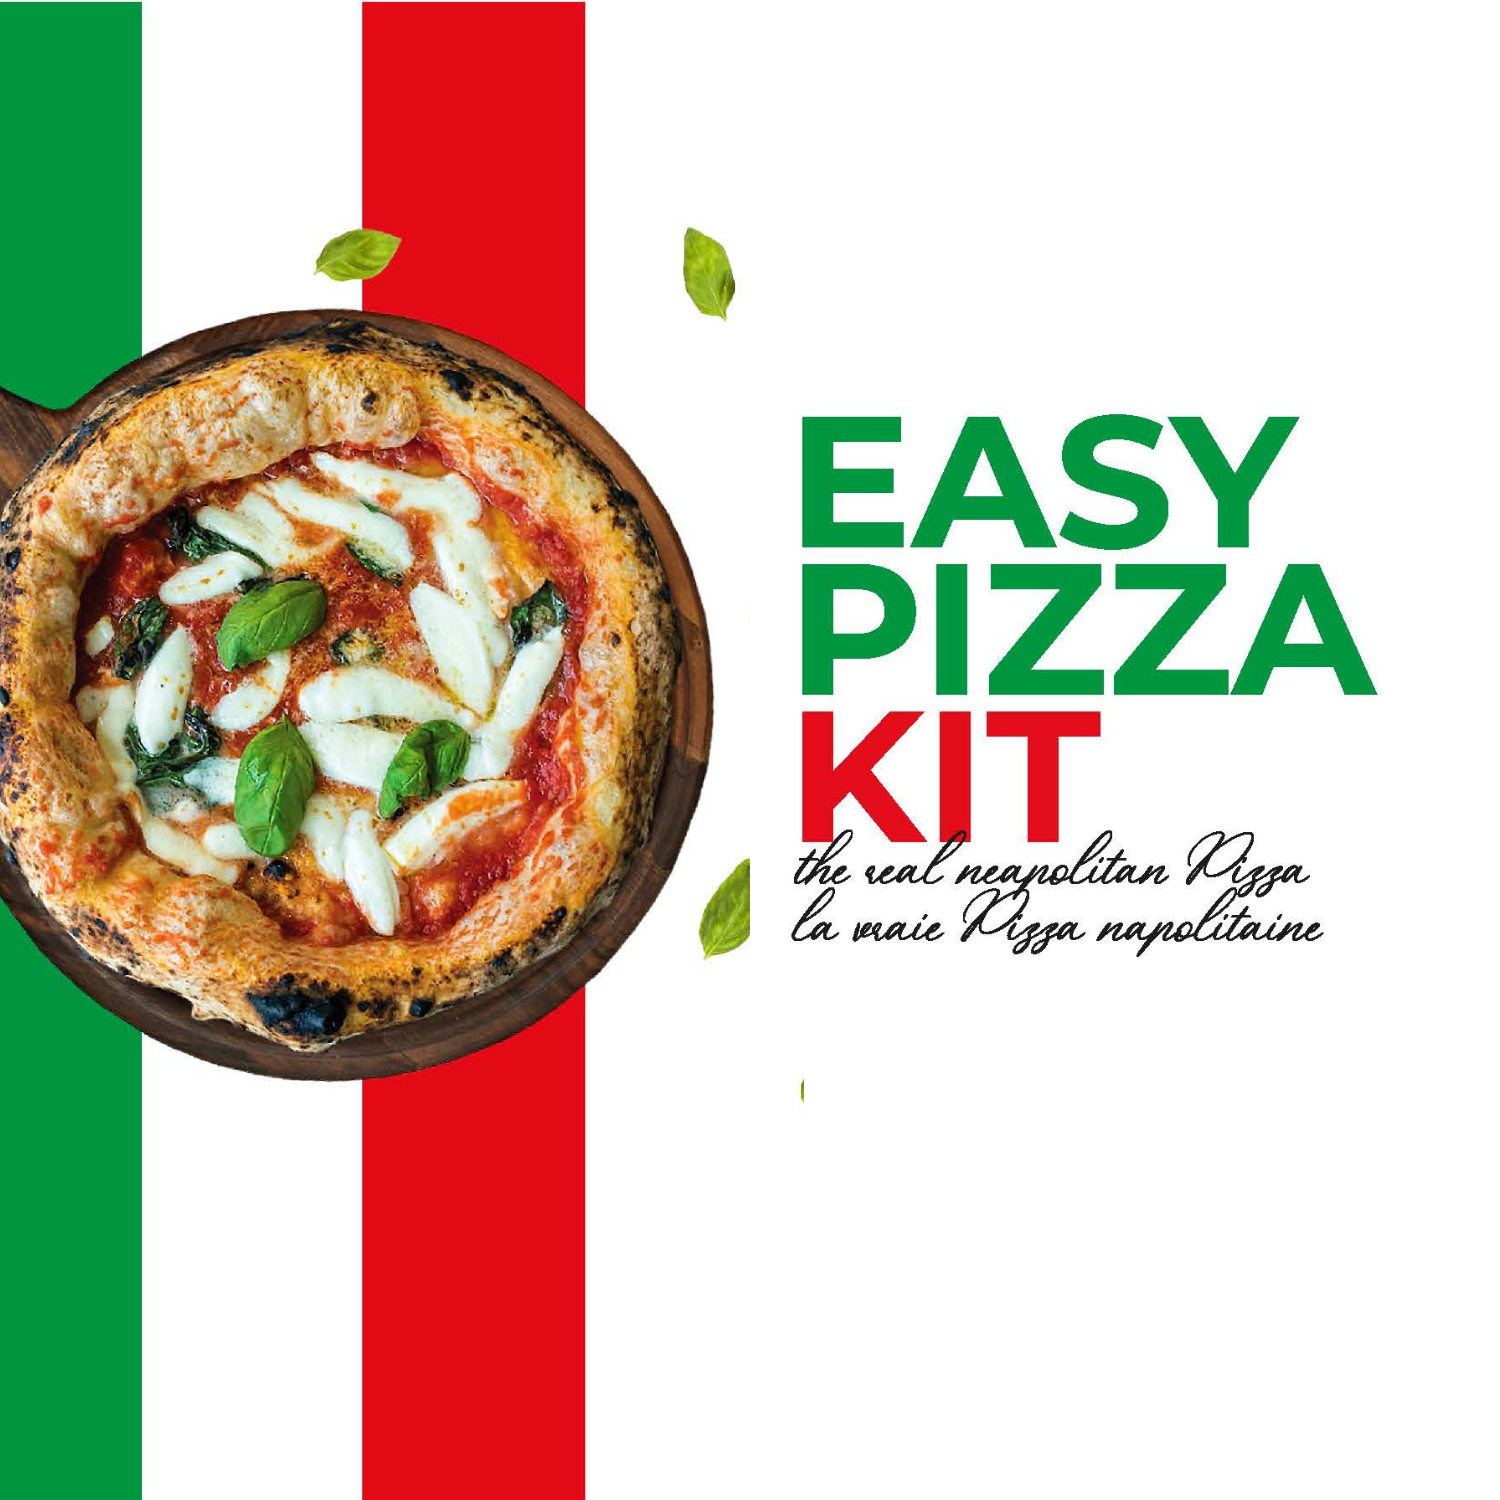 Fratelli D'Amico, Pizza Kit from Italy, authentic homemade